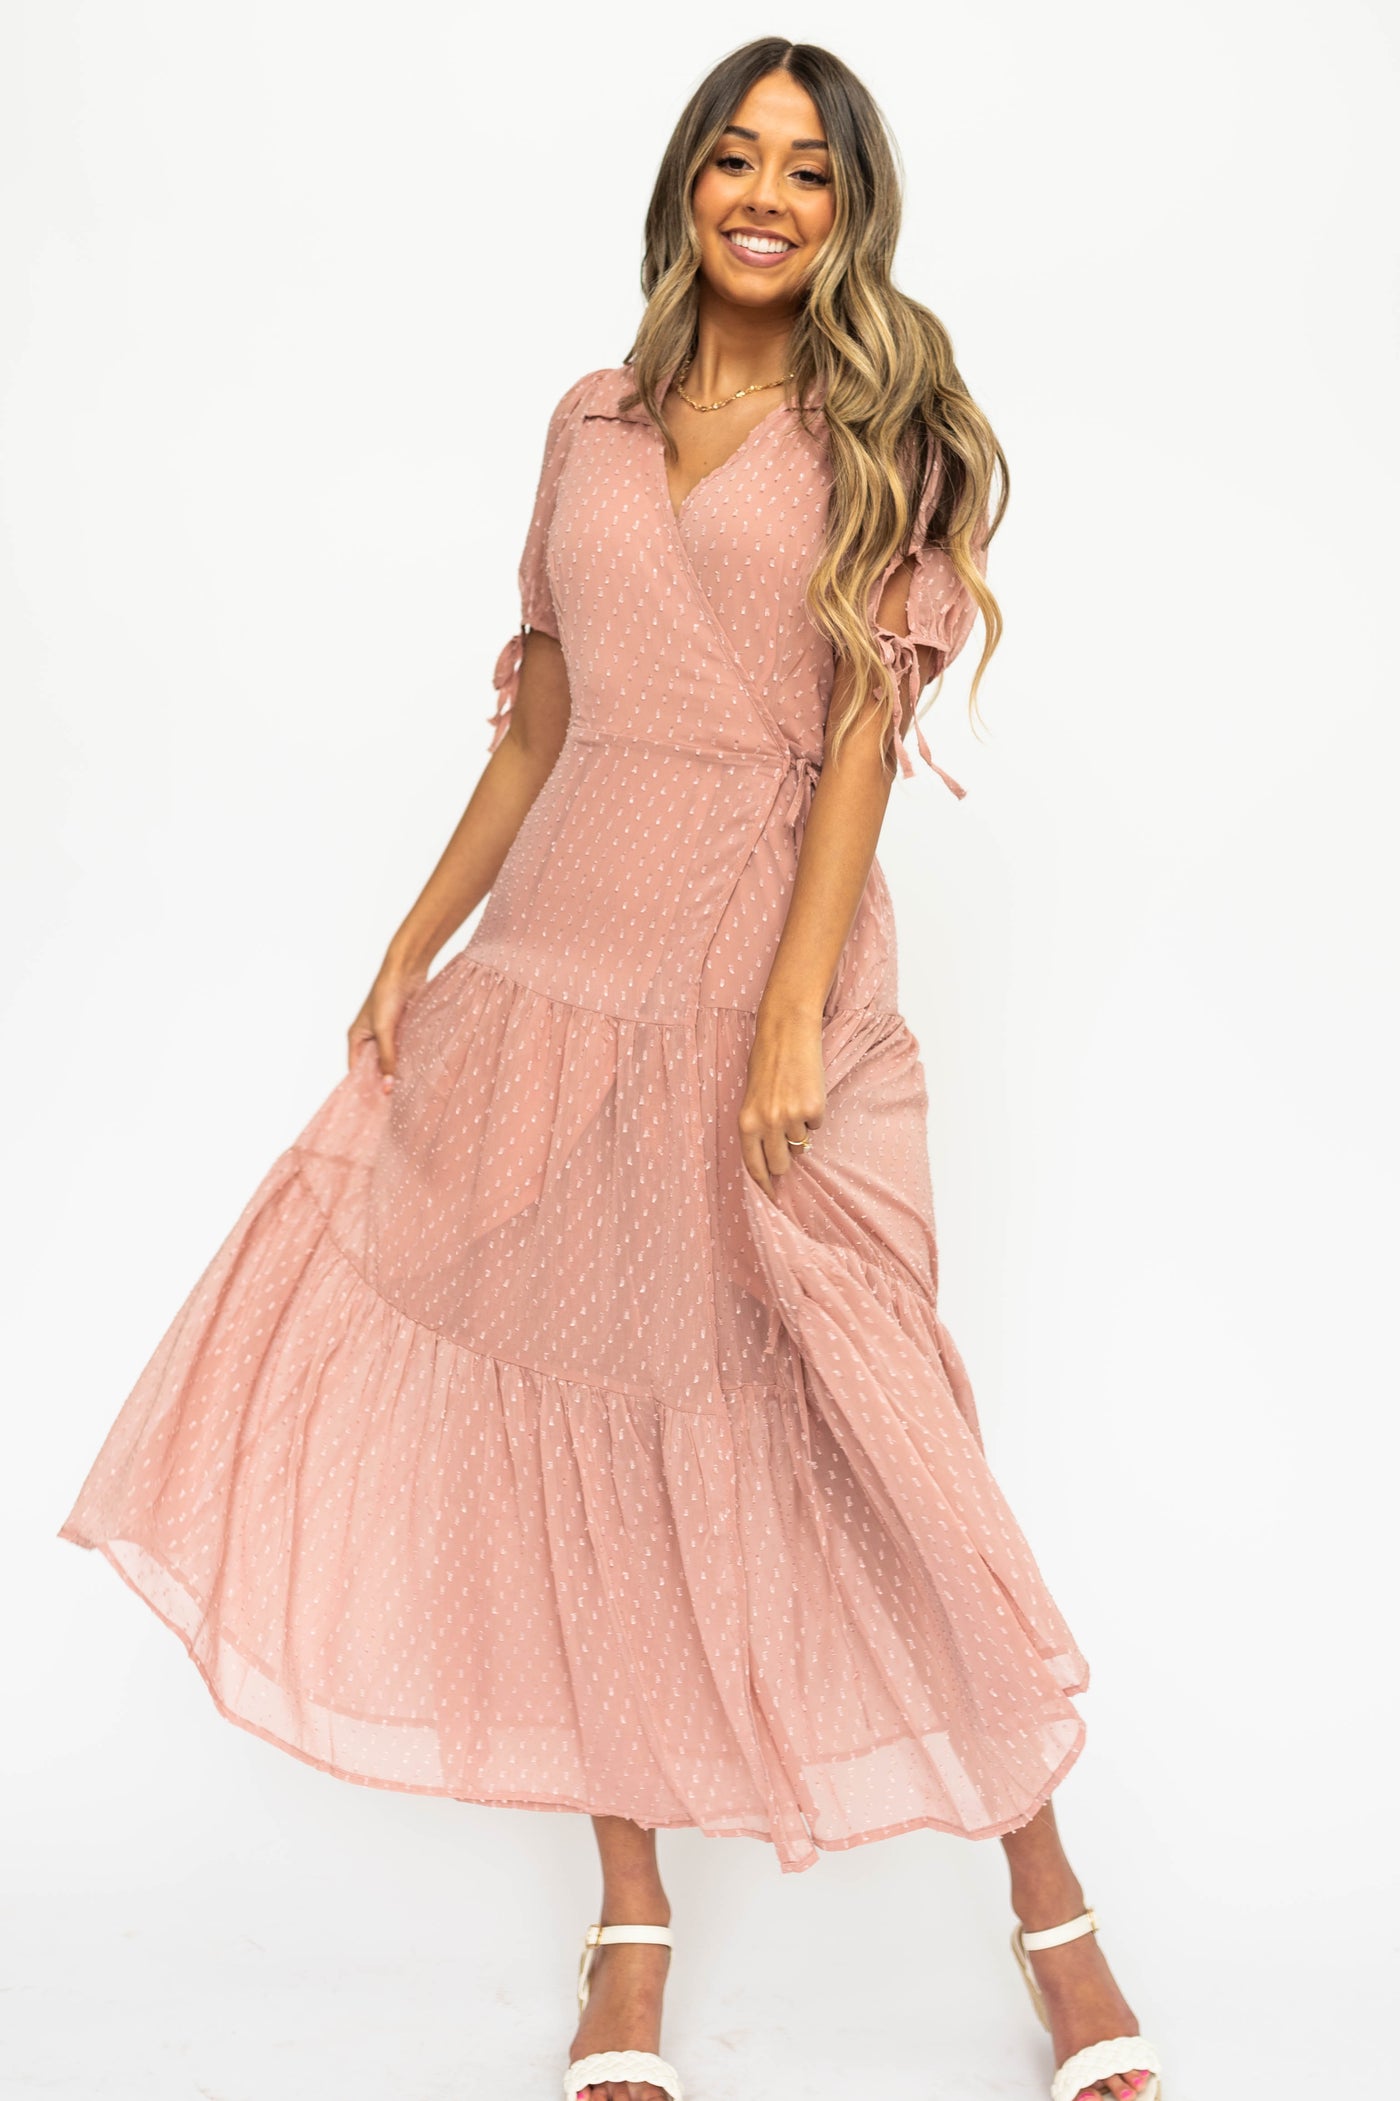 Blush wrap dress with v-neck and short sleeves